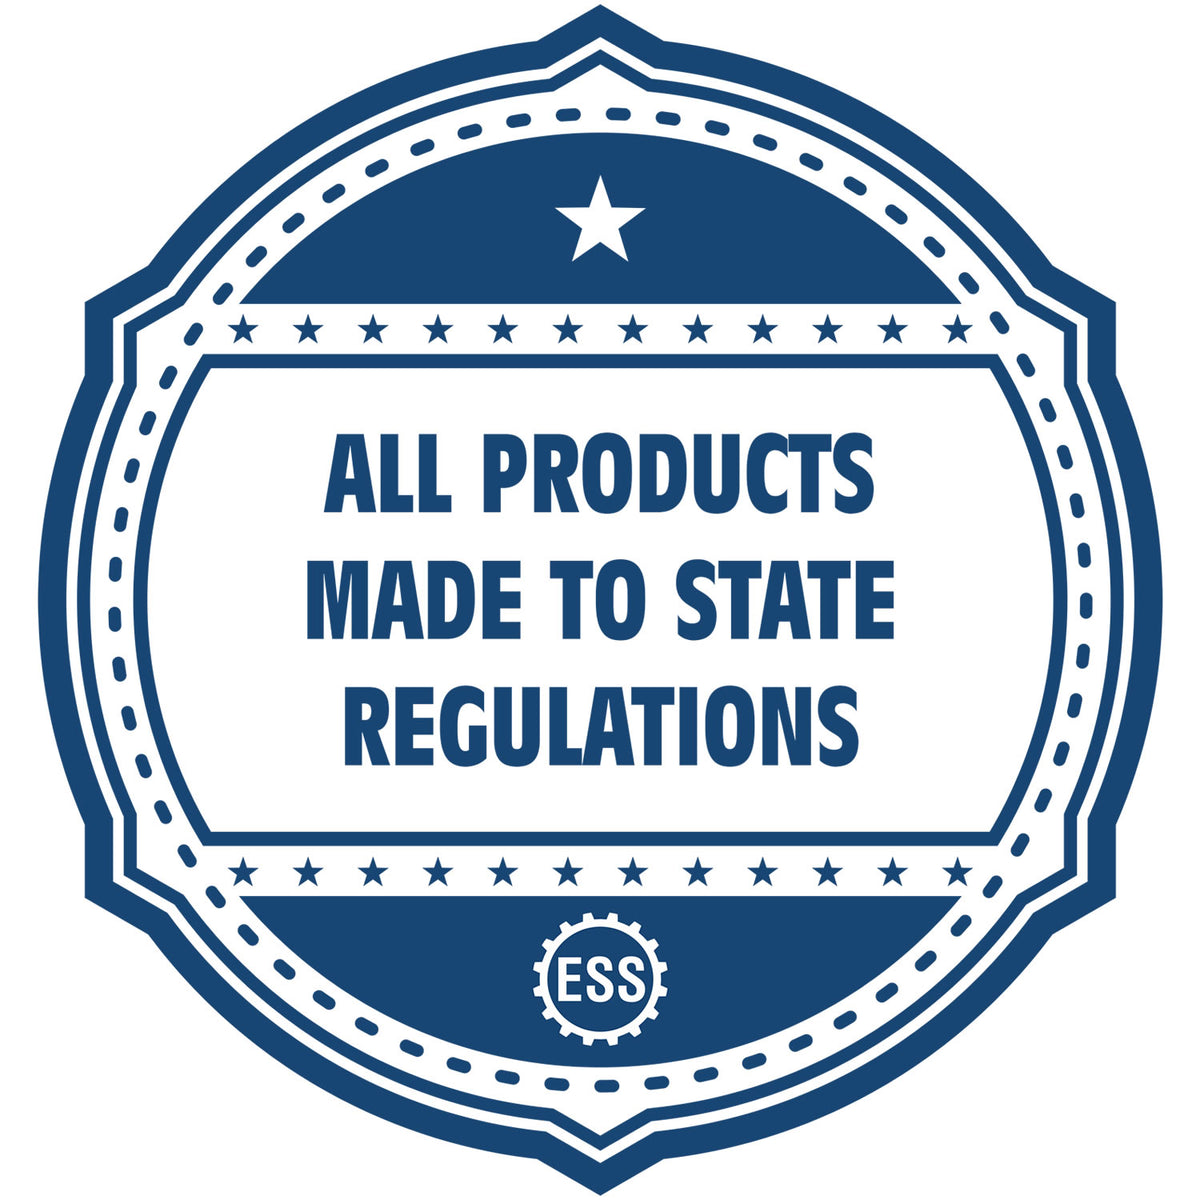 An icon or badge element for the State of Rhode Island Architectural Seal Embosser showing that this product is made in compliance with state regulations.